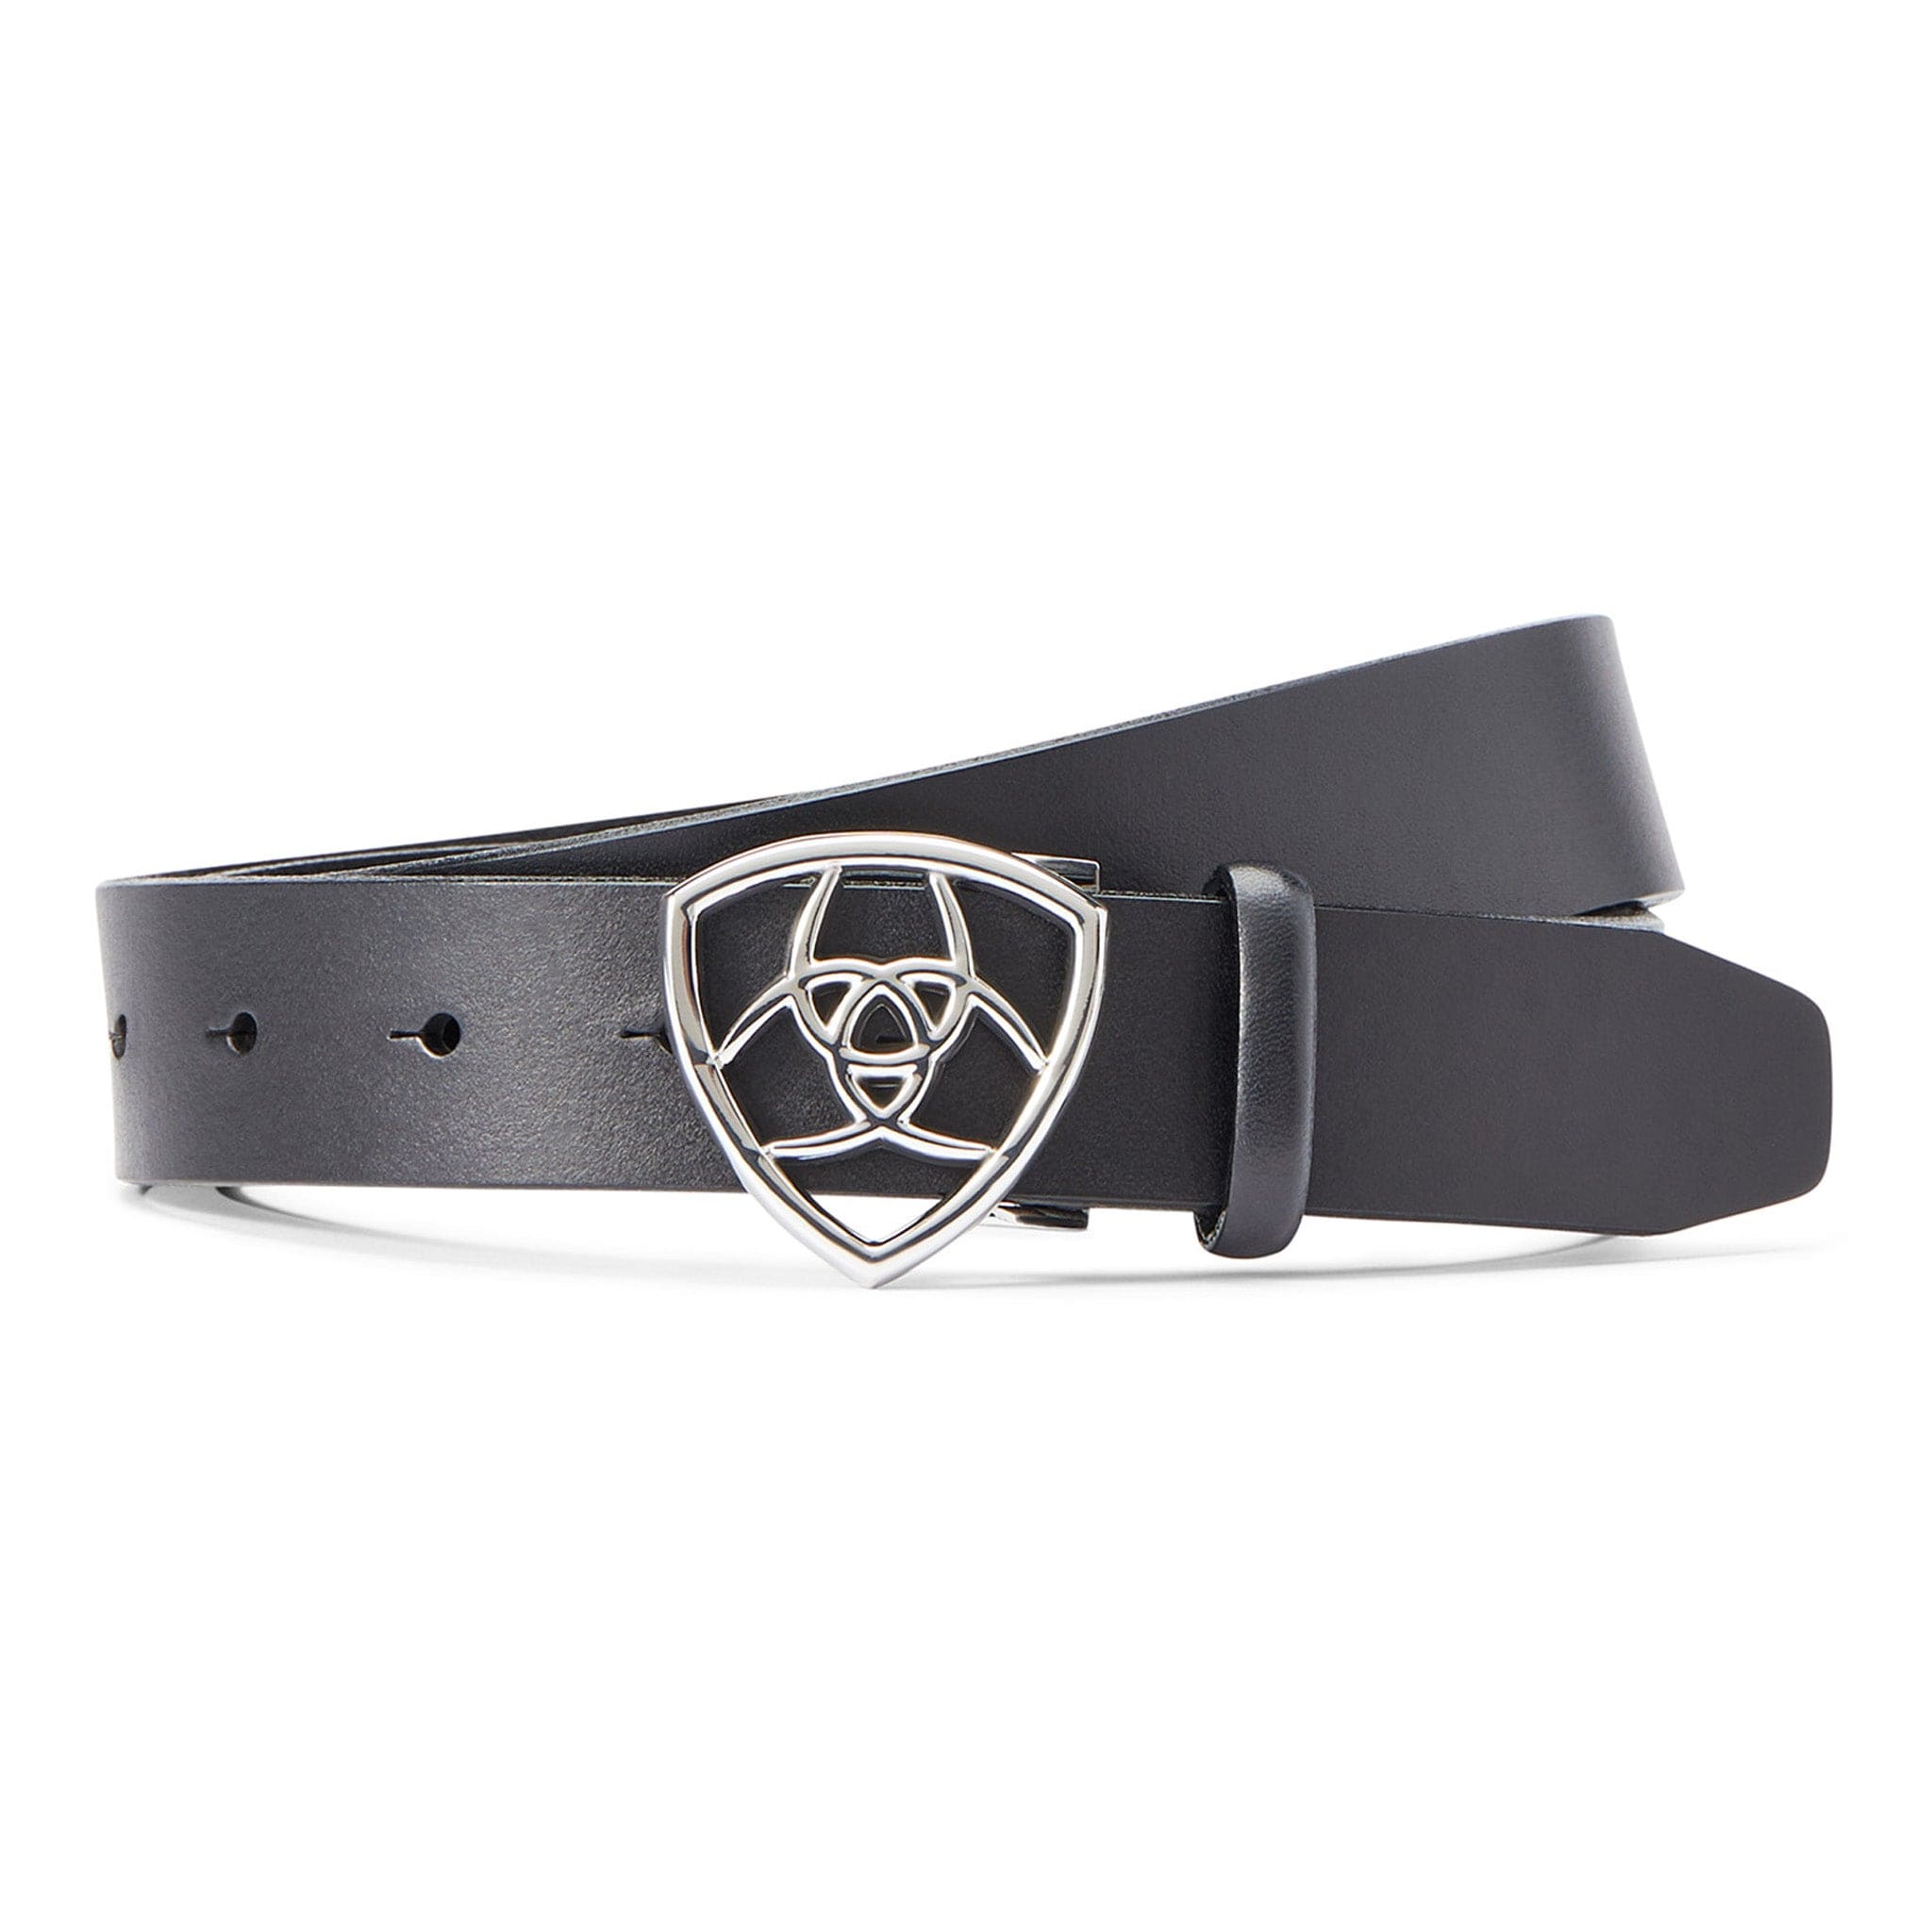 Ariat The Shield Belt 10043947 Black and Pewter